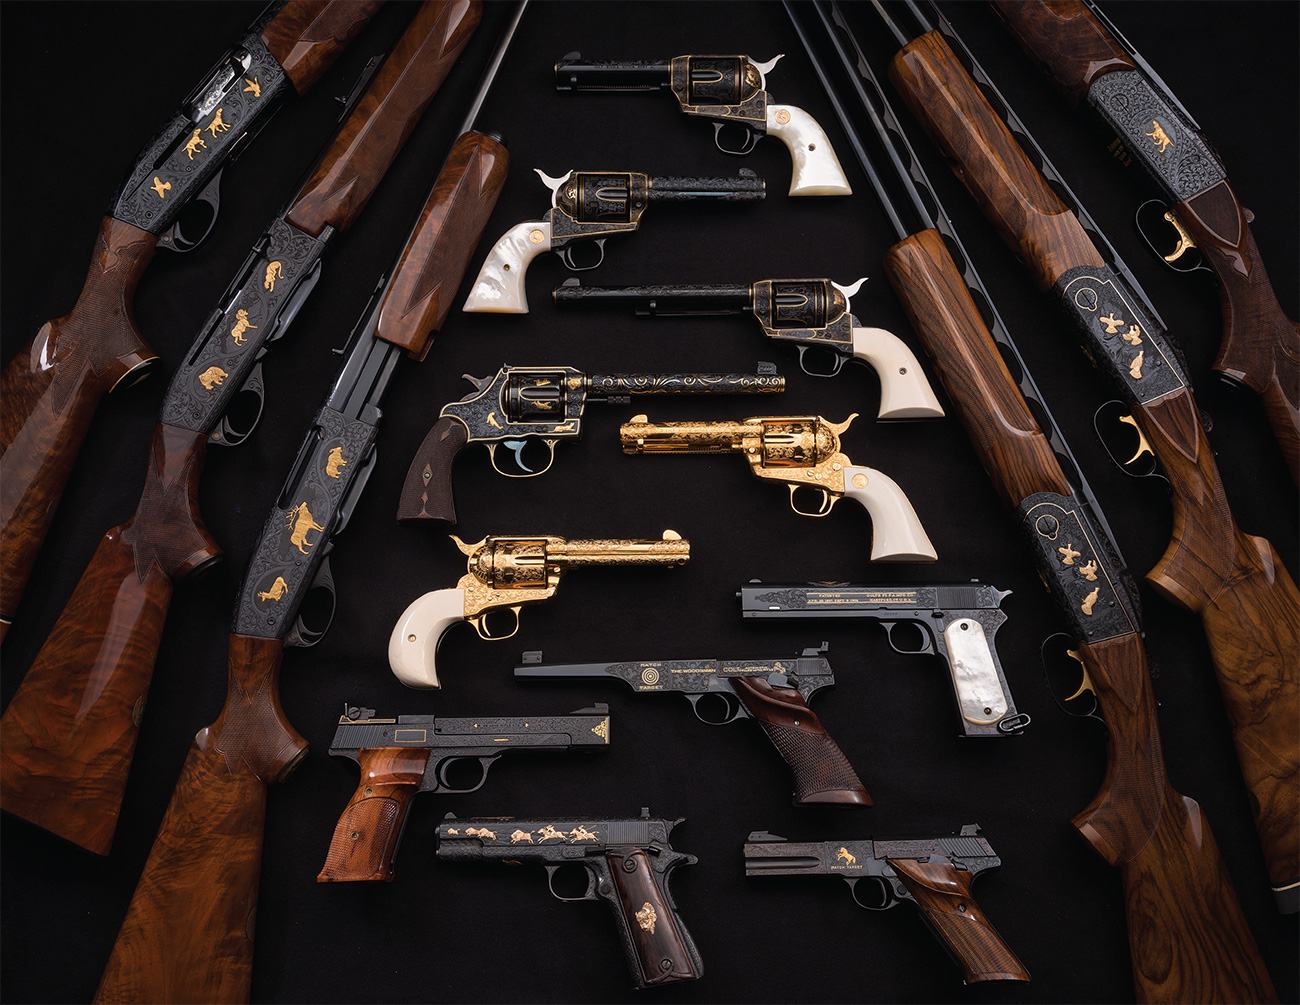 3 Reliable Ways to Find Used Guns for Sale